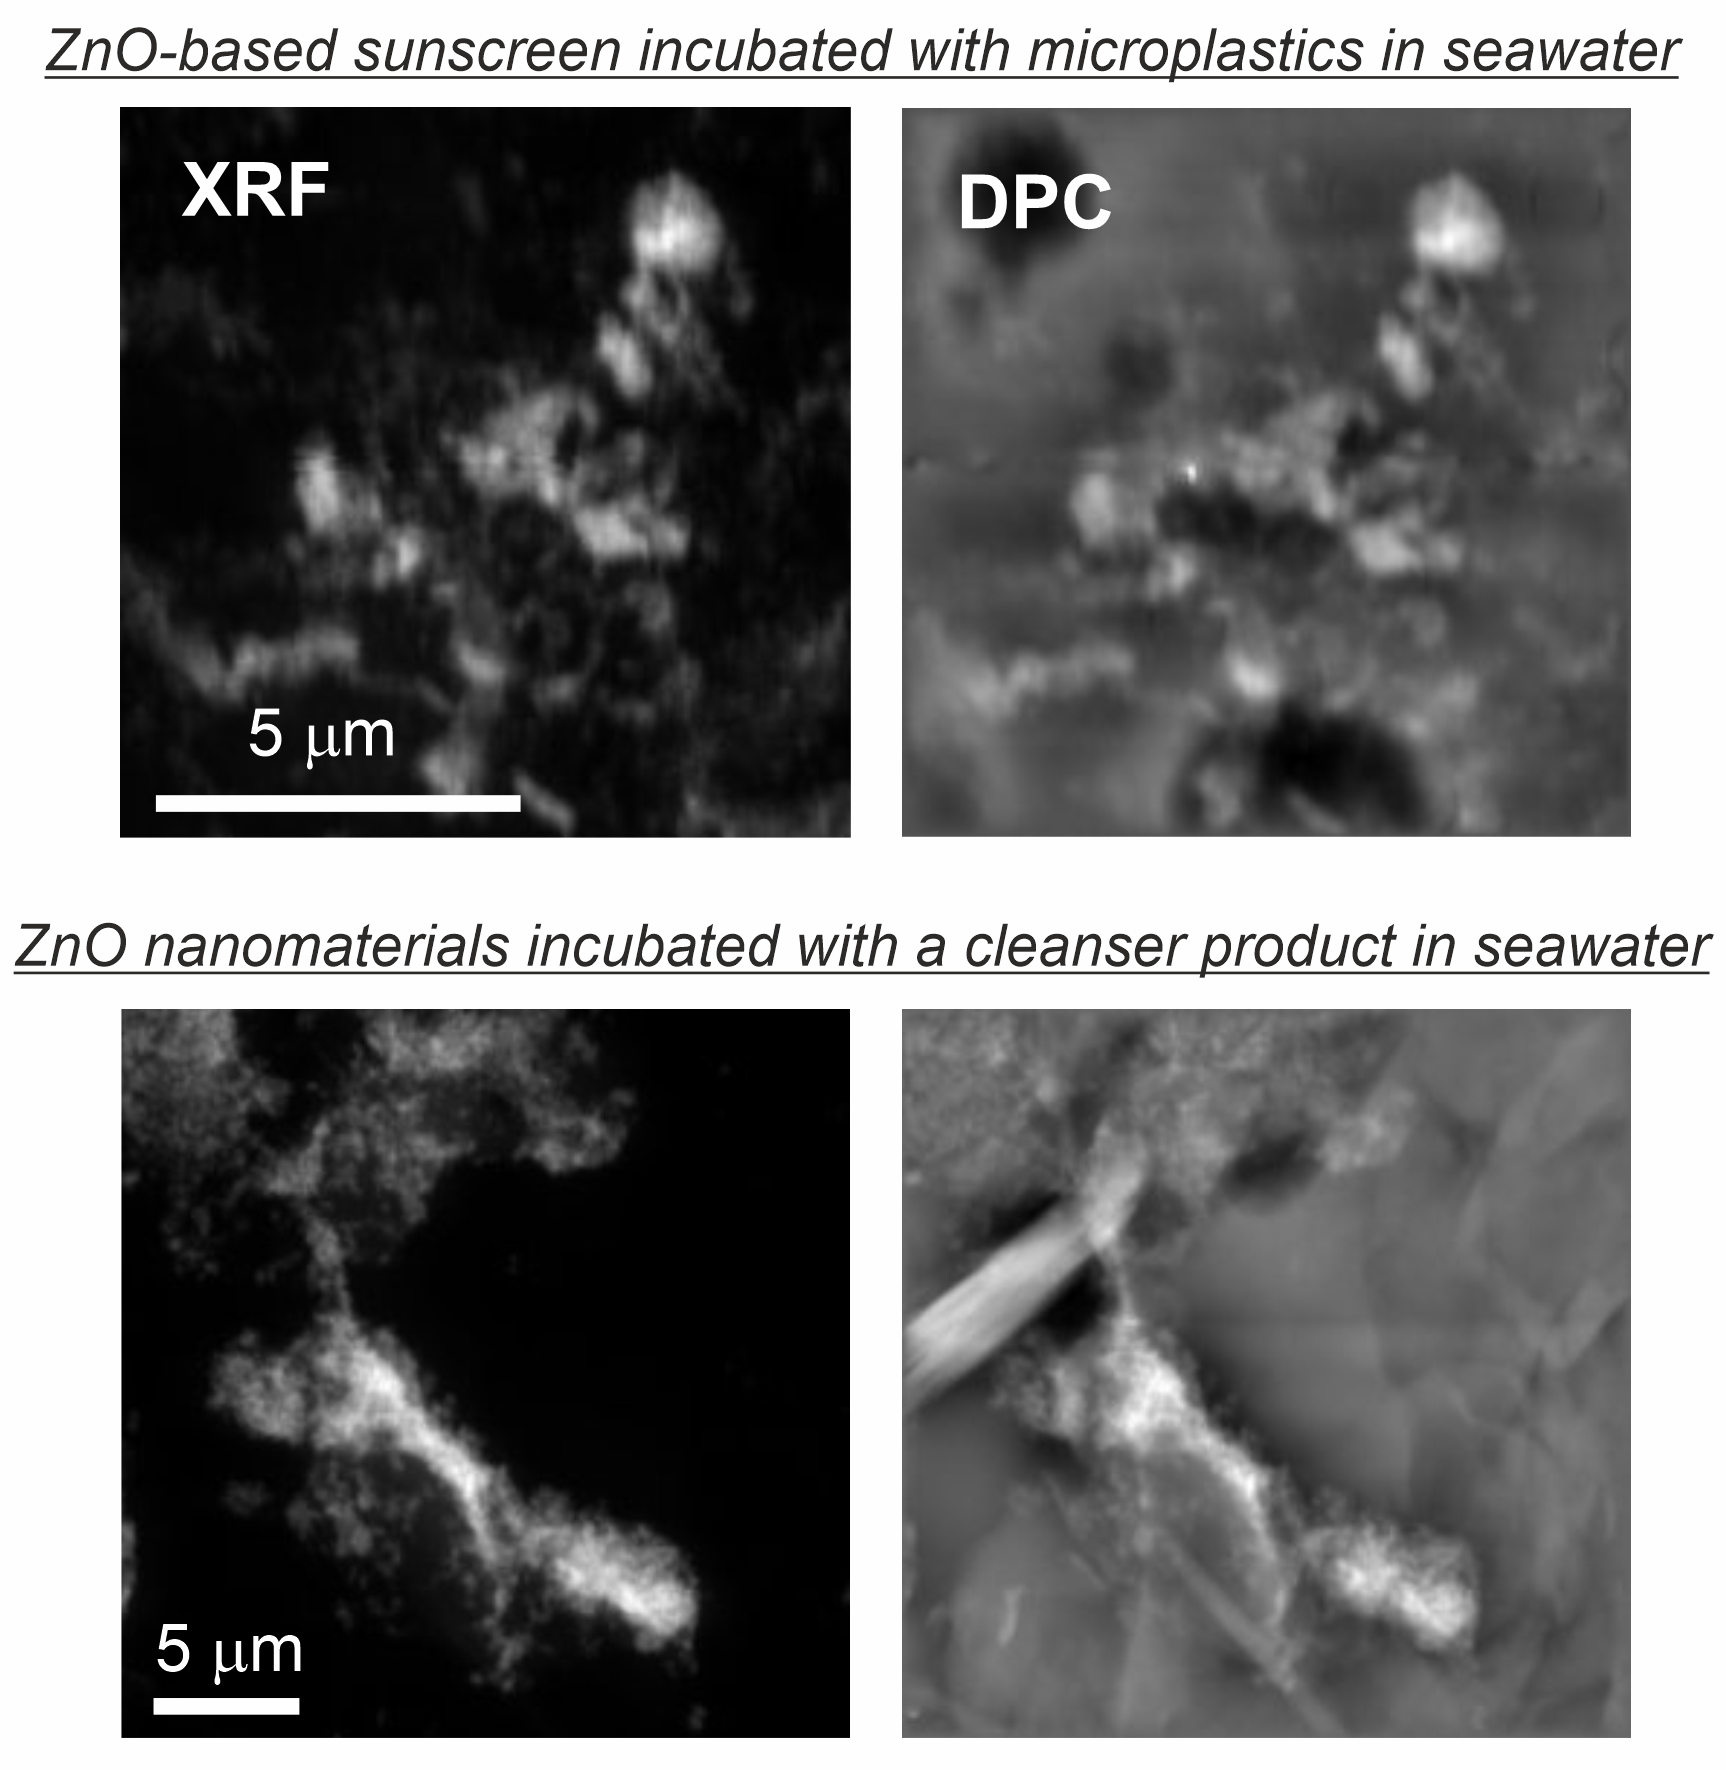 Figure 2. X-ray fluorescence (XRF, left) maps (100 nm pixel size) for the Zn signal and differential phase contrast (DPC, right) image for morphological inspection of the adsorbed structures measured at the hard X-ray nanoprobe (I14 beamline). Zn-particles from the sunscreen were deposited on the pristine microplastics after incubation in seawater (top row) while ZnO nanomaterials were deposited on the microplastics leached from the exfoliating cleanser after incubation in seawater as well (bottom row).<br/><br/>NOTE: All the images are an adaptation of the published paper